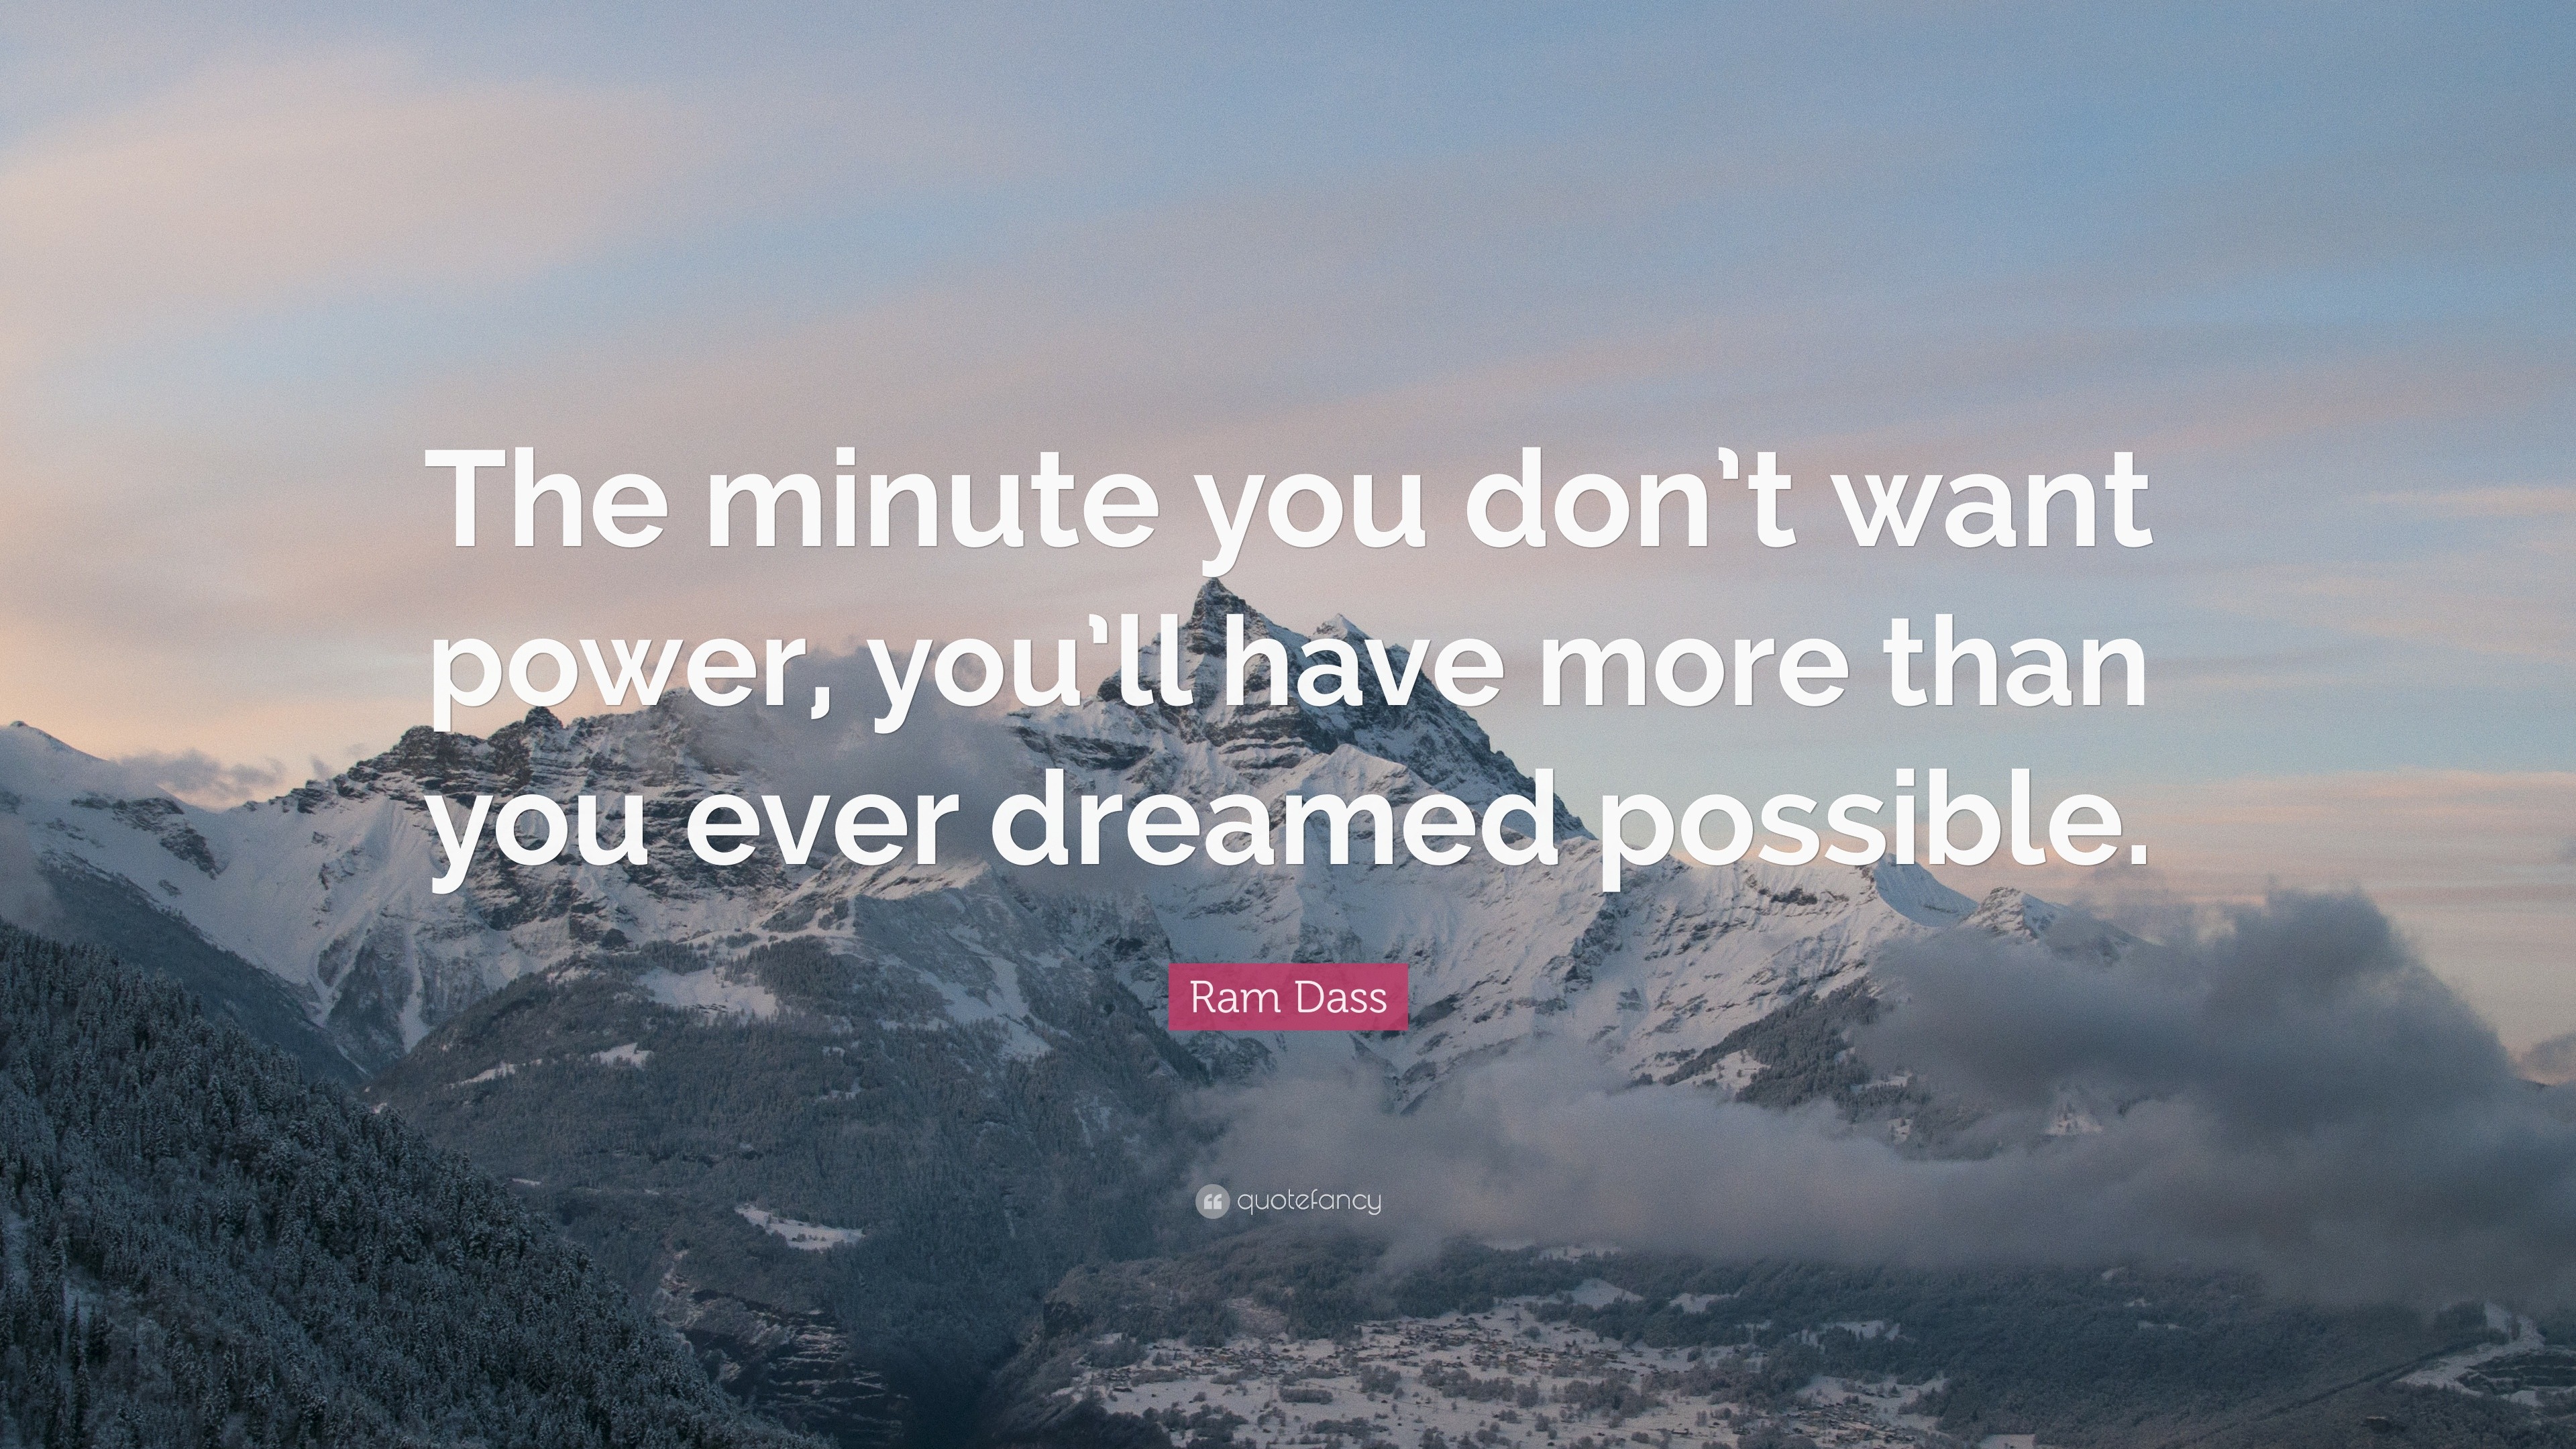 Ram Dass Quote: “The minute you don’t want power, you’ll have more than ...